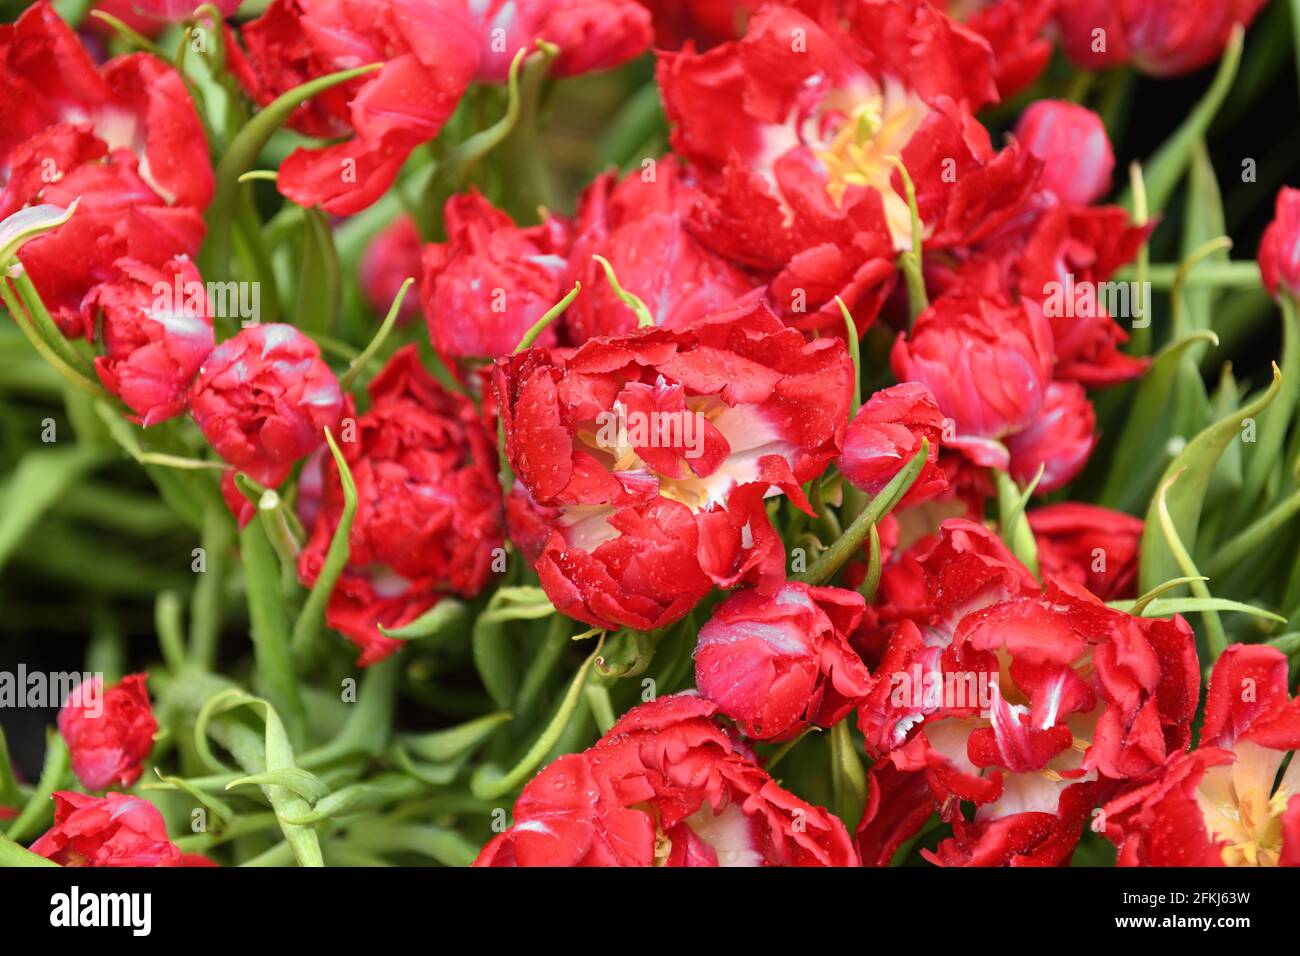 Tulip First Price, unique dazzling giant peony-like blooms in bright red, with water droplets Stock Photo